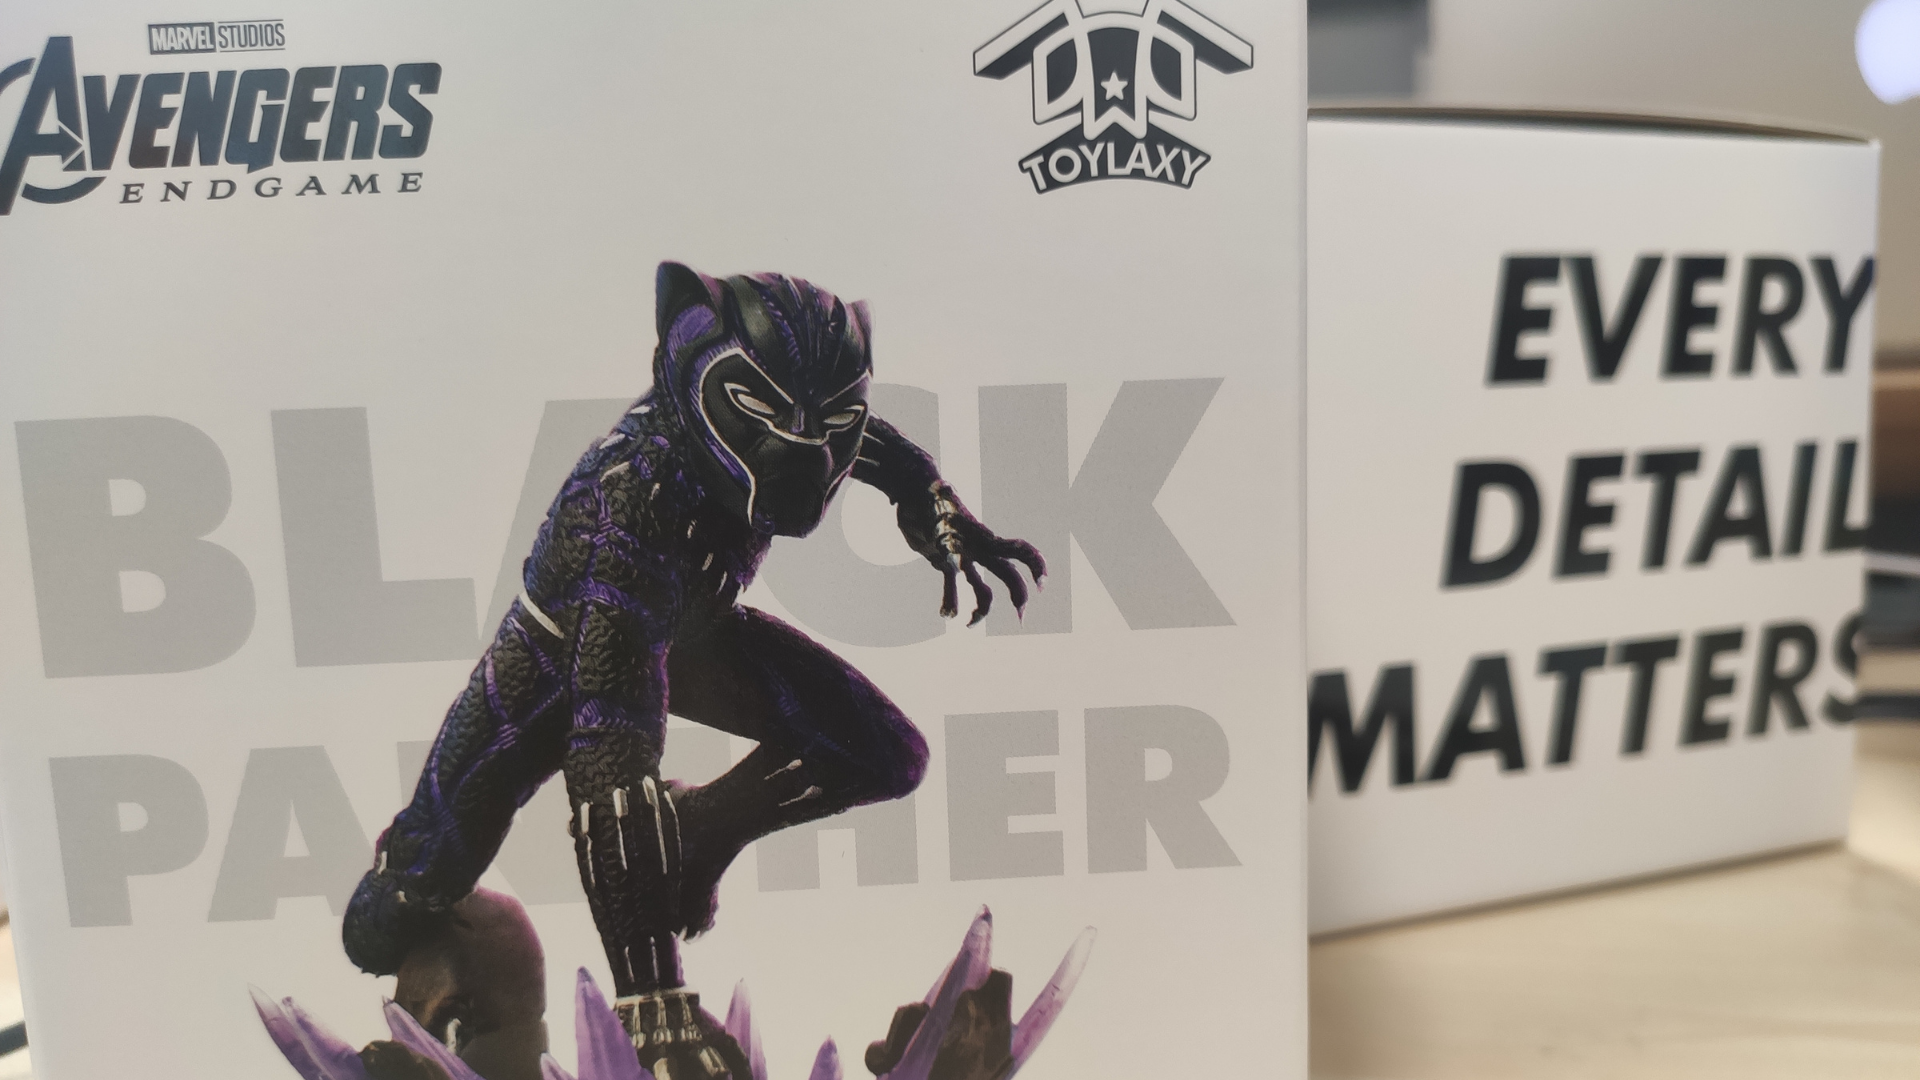 front-dimension-of-toylaxy-marvel-avenger-4-end-game-wave3-black-panther-figure-with-the-right-side-toylaxy-slogan-every-detail-matters